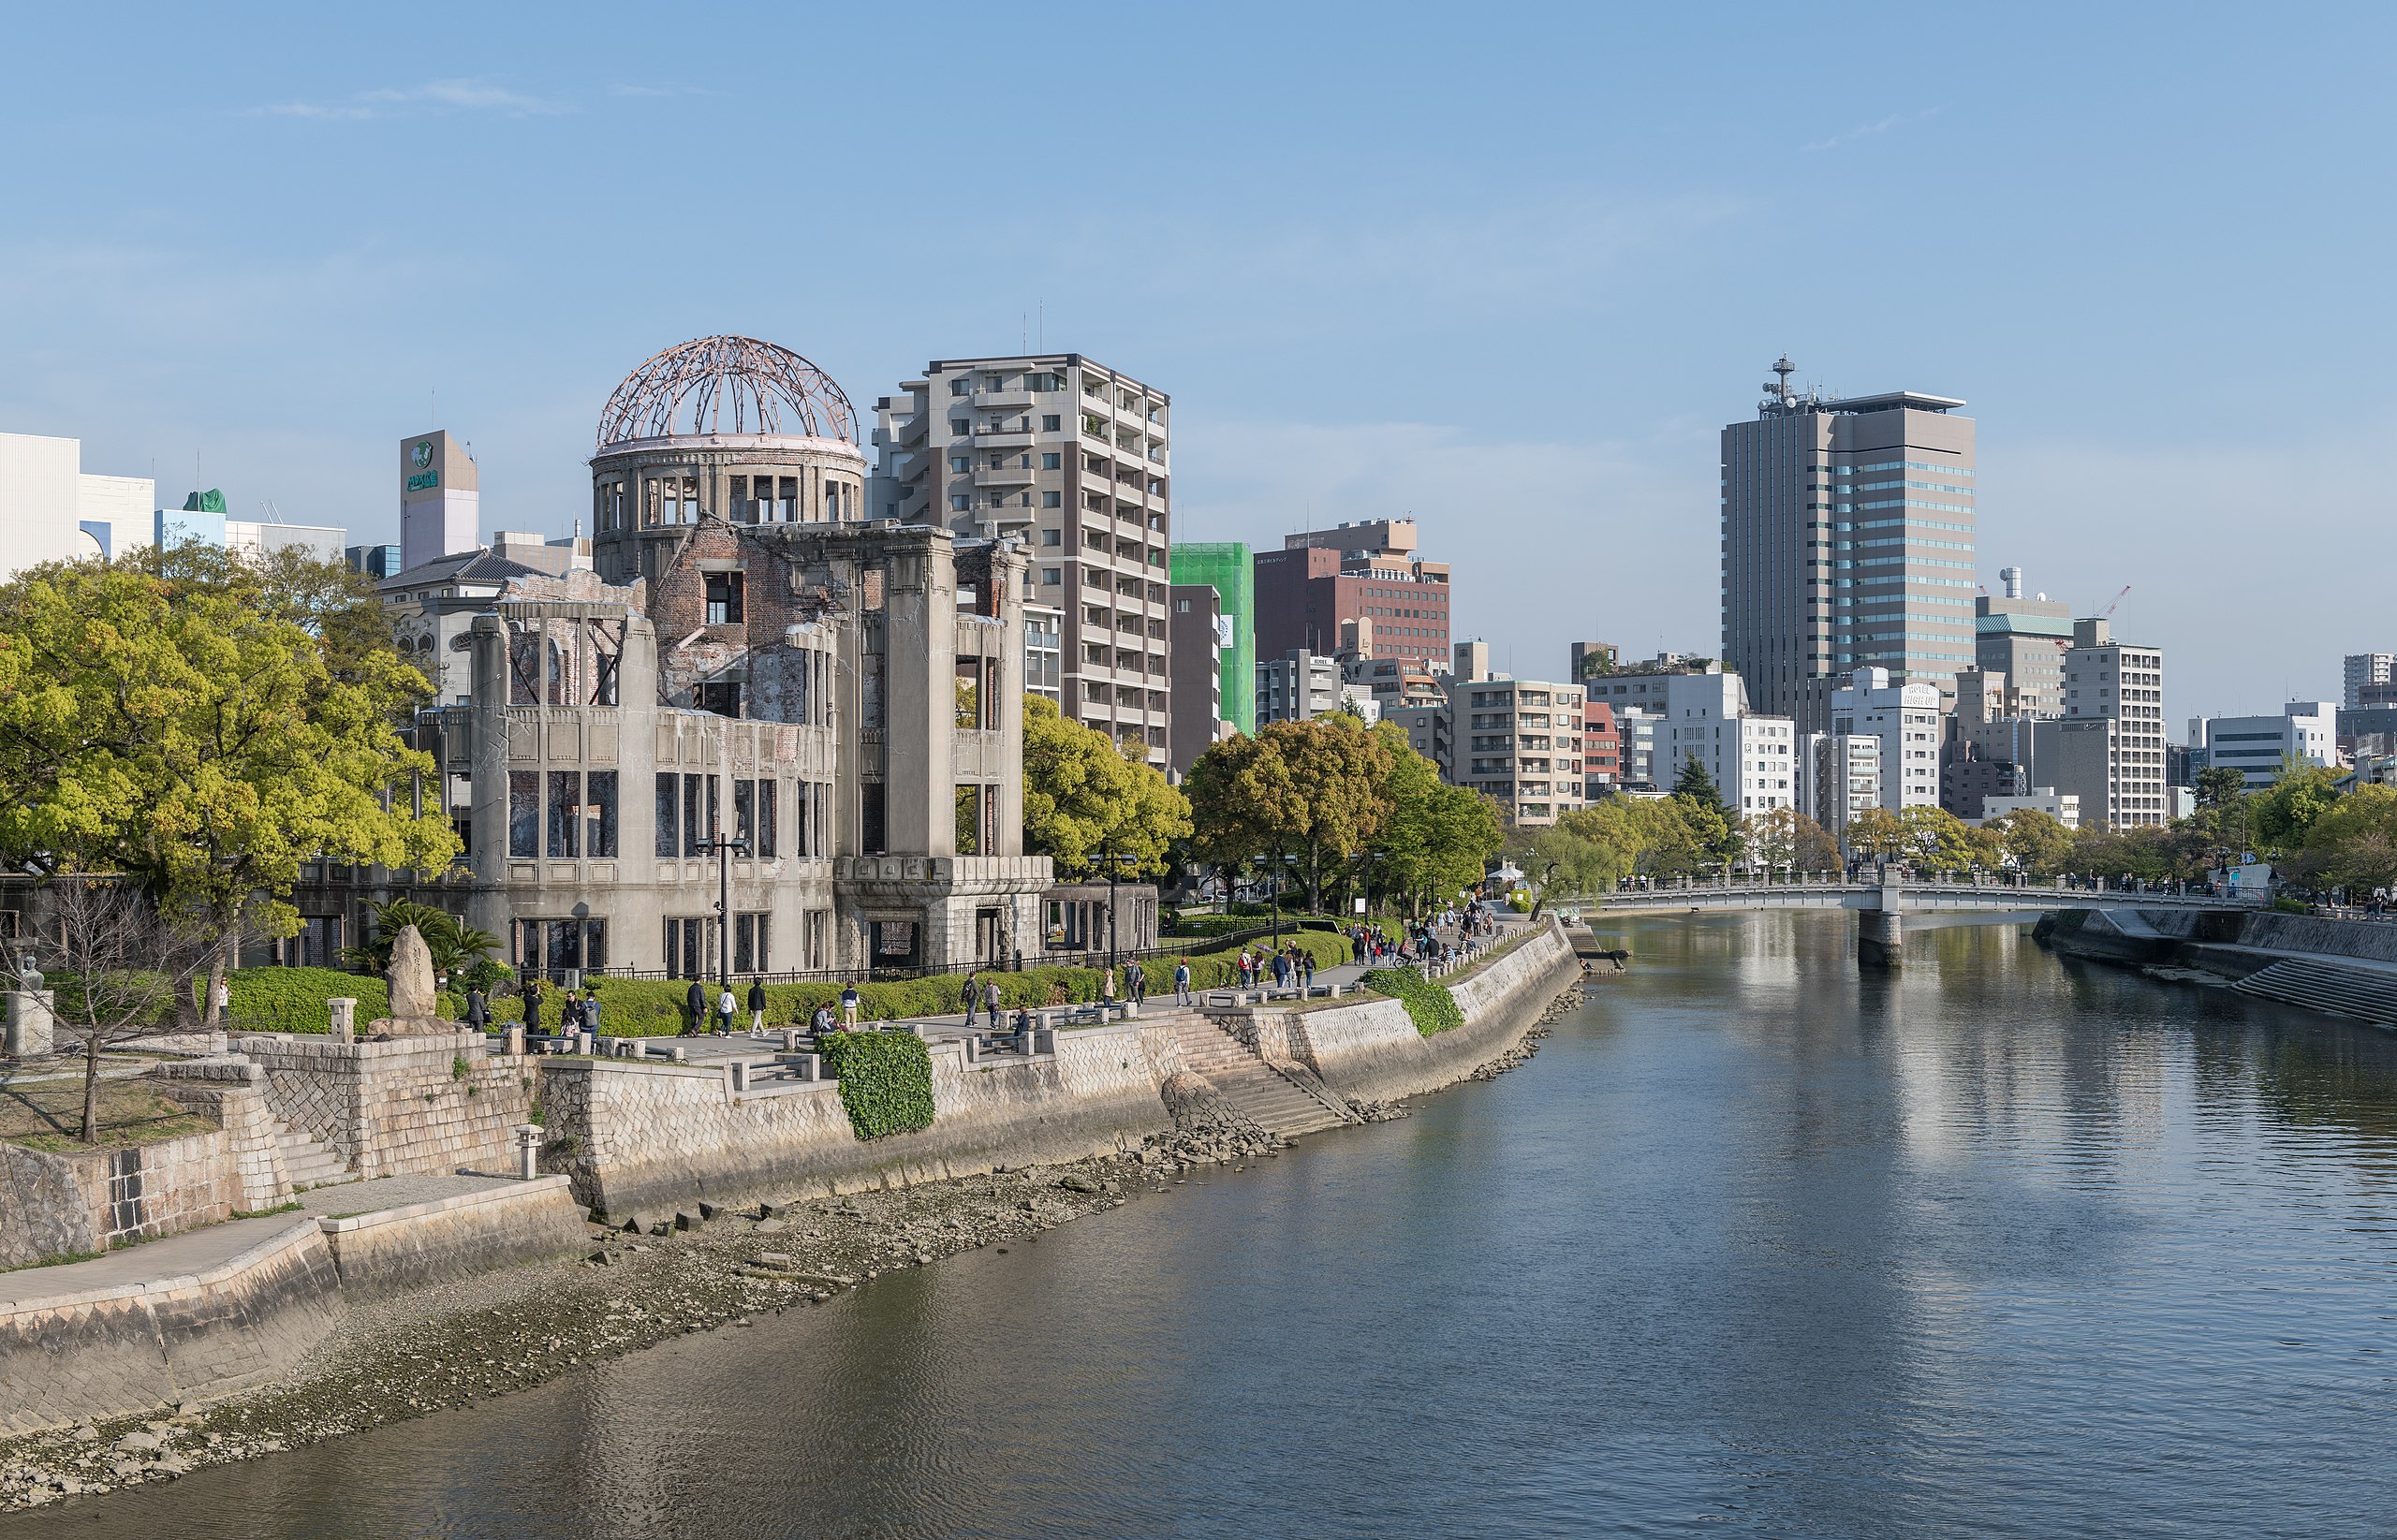 G7 Hiroshima Summit: An opportunity to advance nuclear disarmament